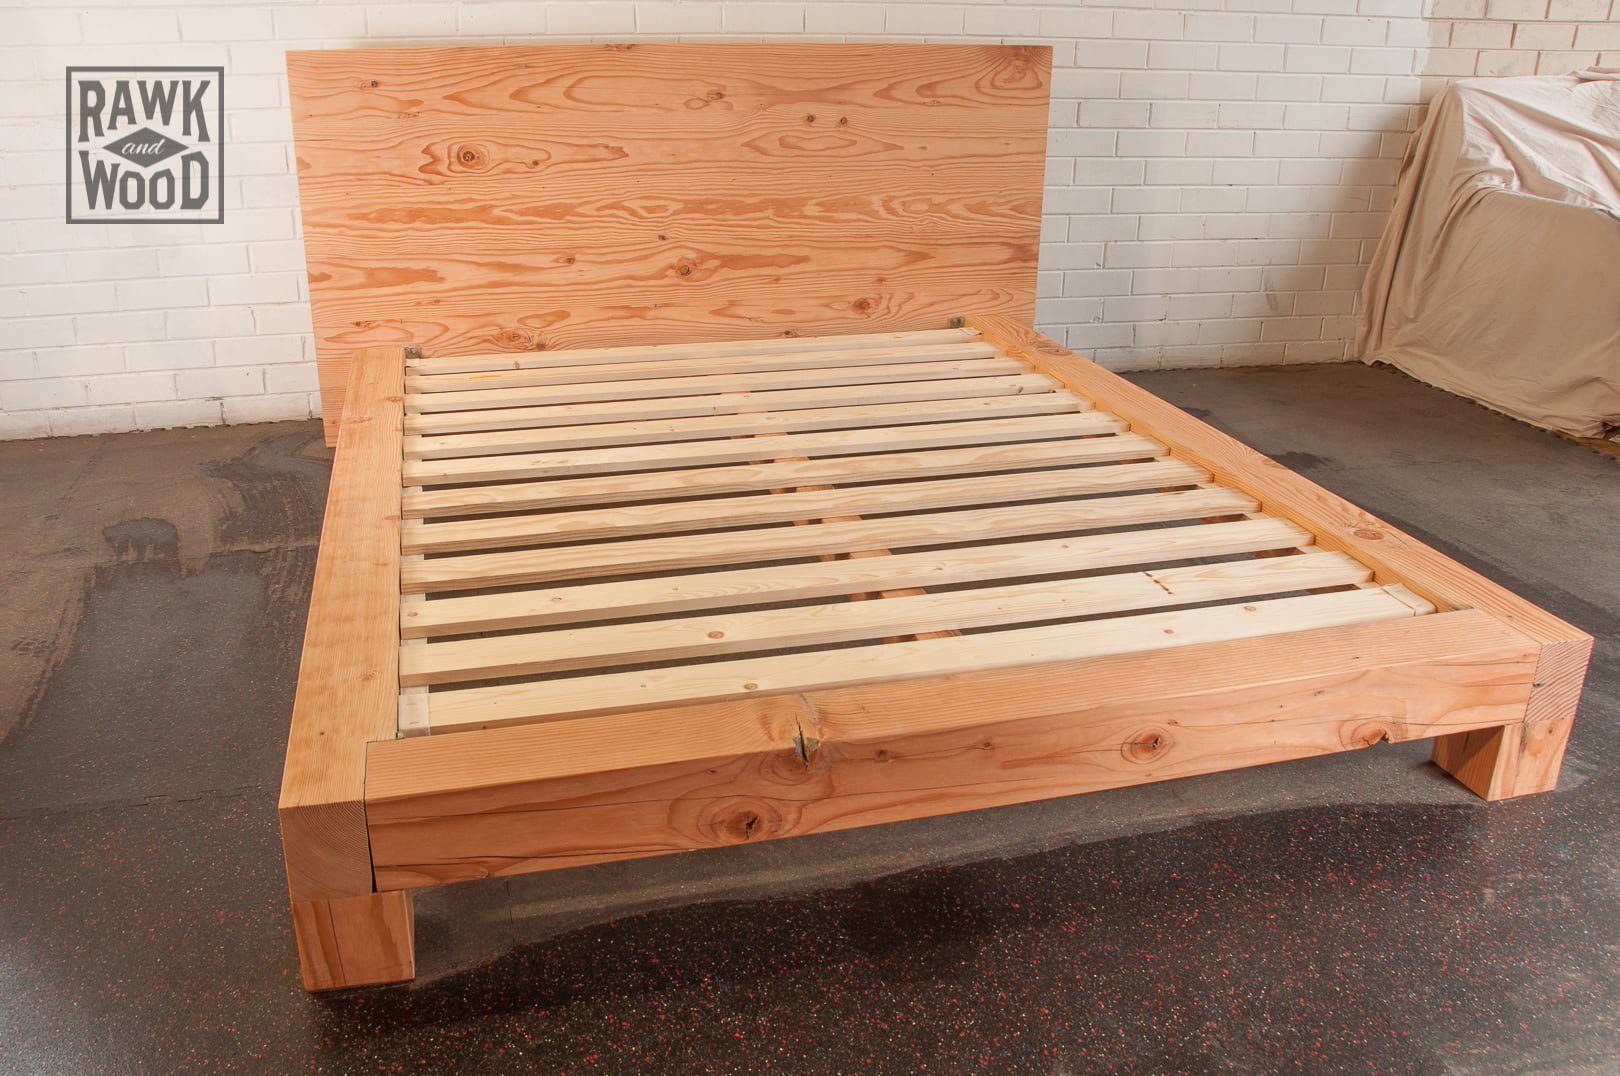 Recycled-Timber-Bed, made in Melbourne by Rawk and Wood